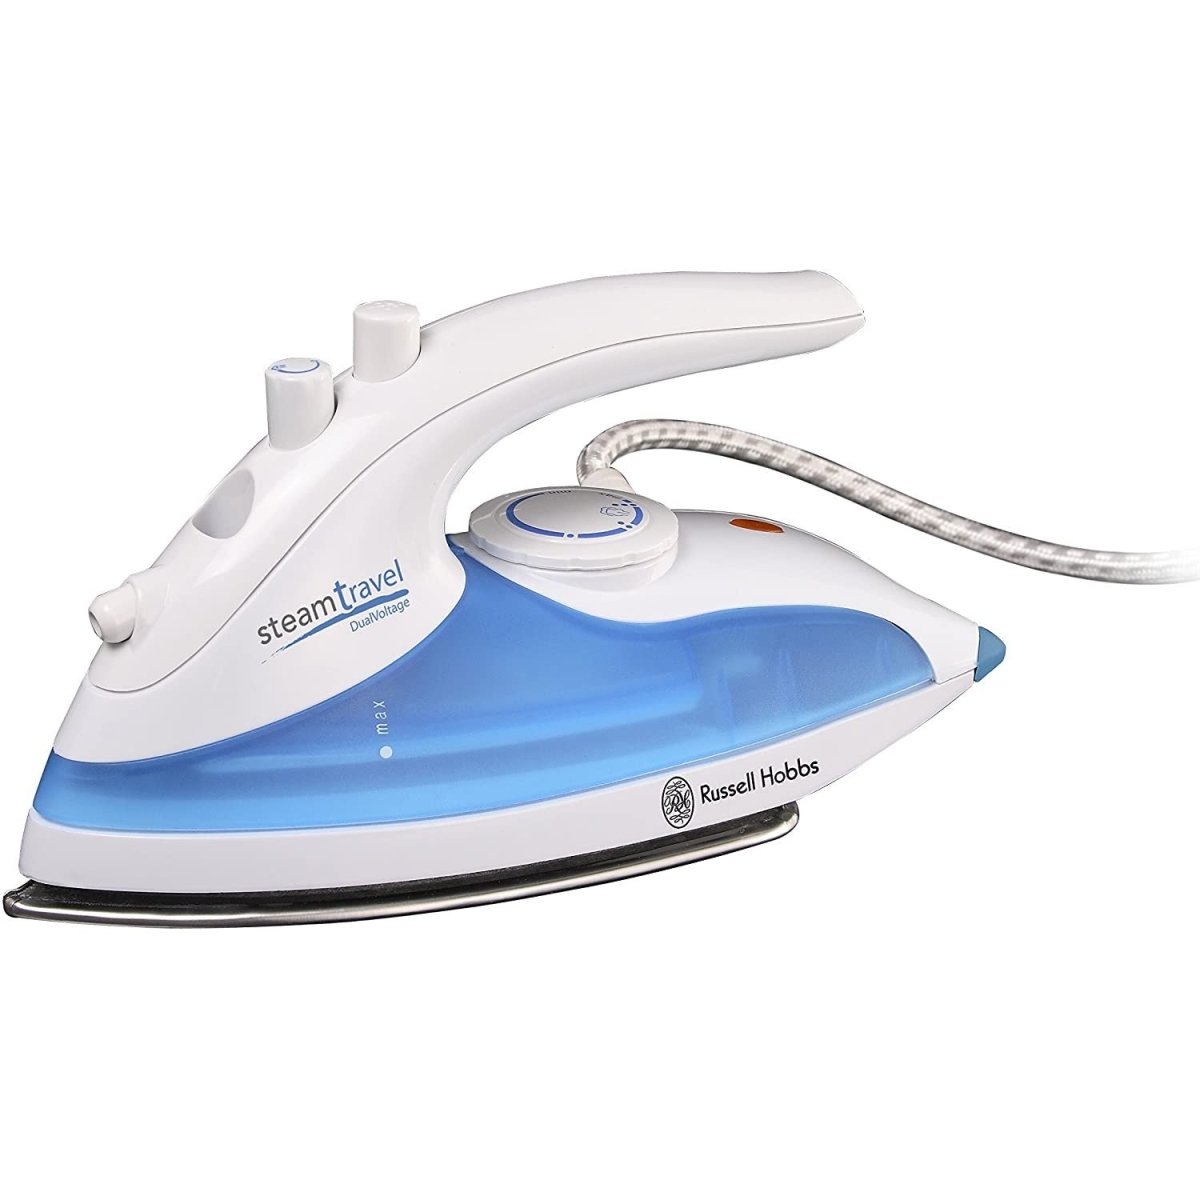 Dual Voltage Stainless Steel Soleplate Travel Iron - Bonnypack